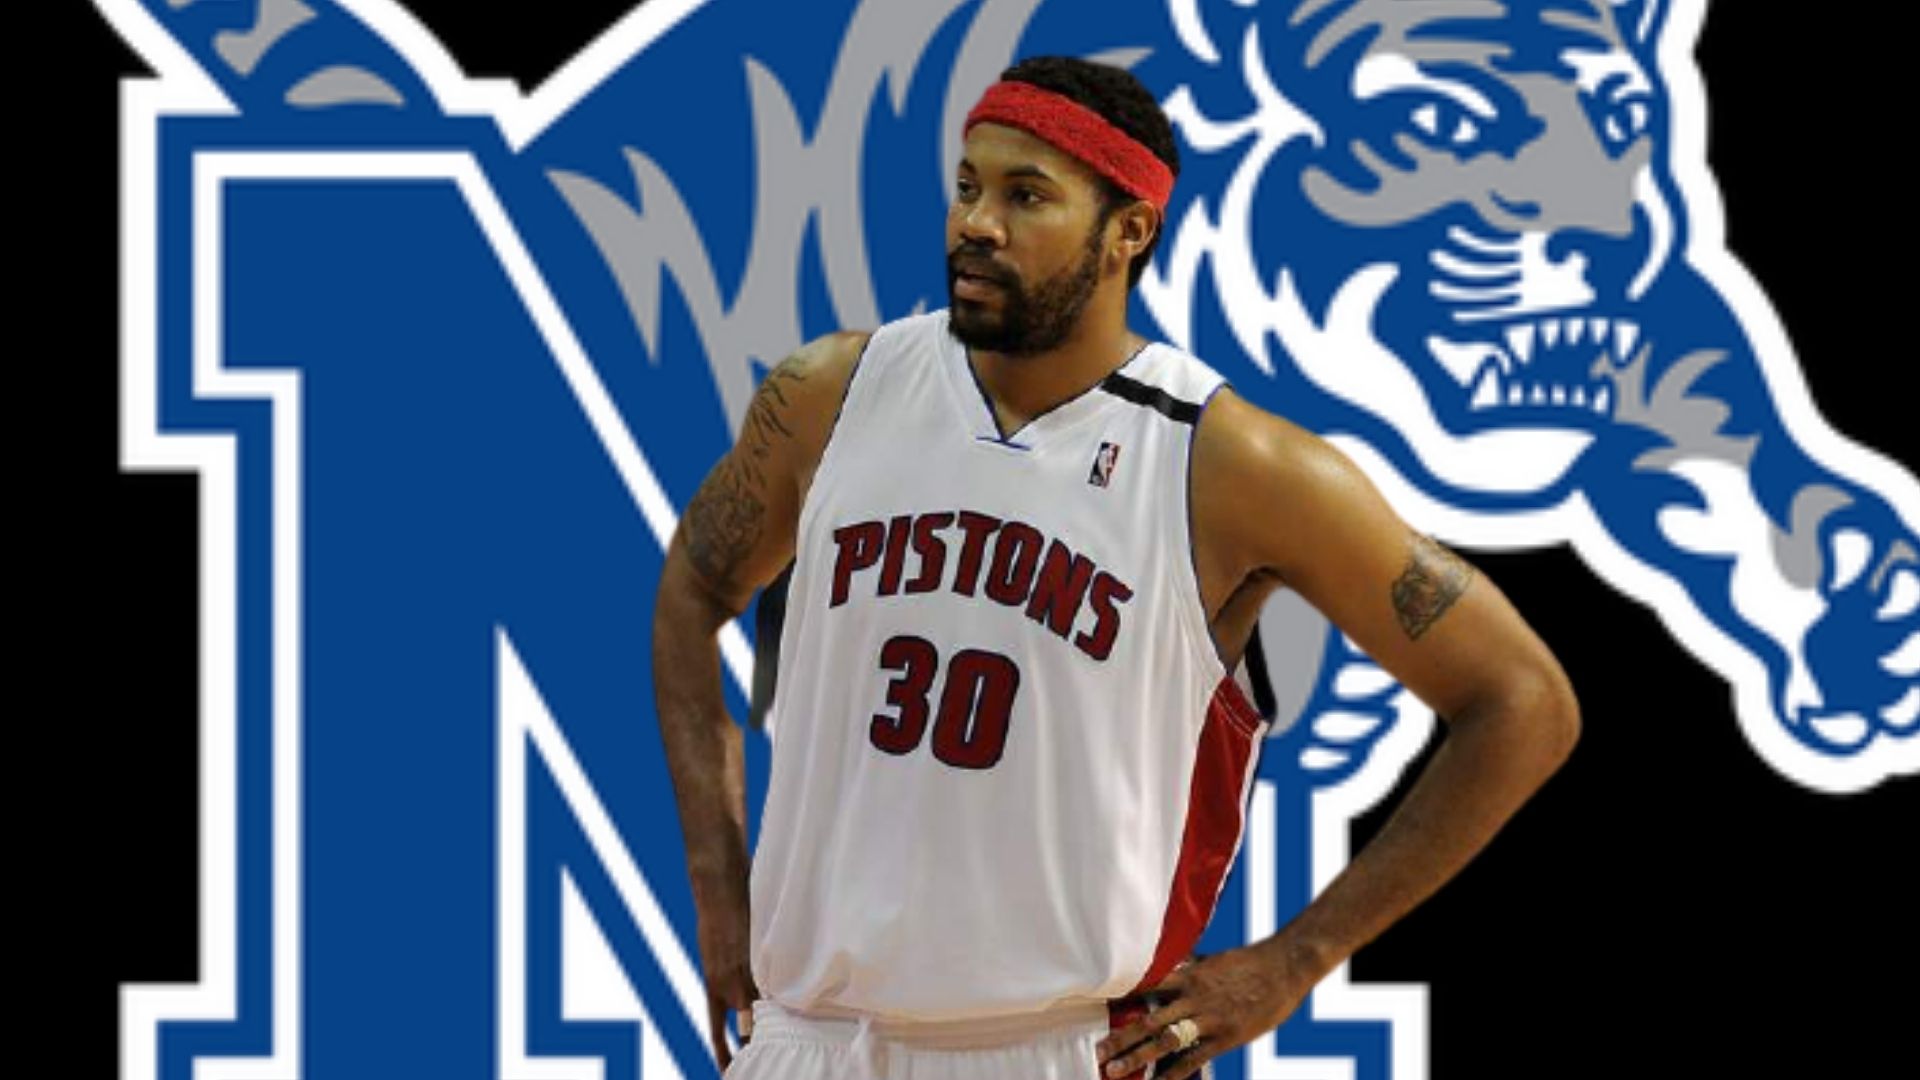 Rasheed Wallace Pistons Assistant Coach